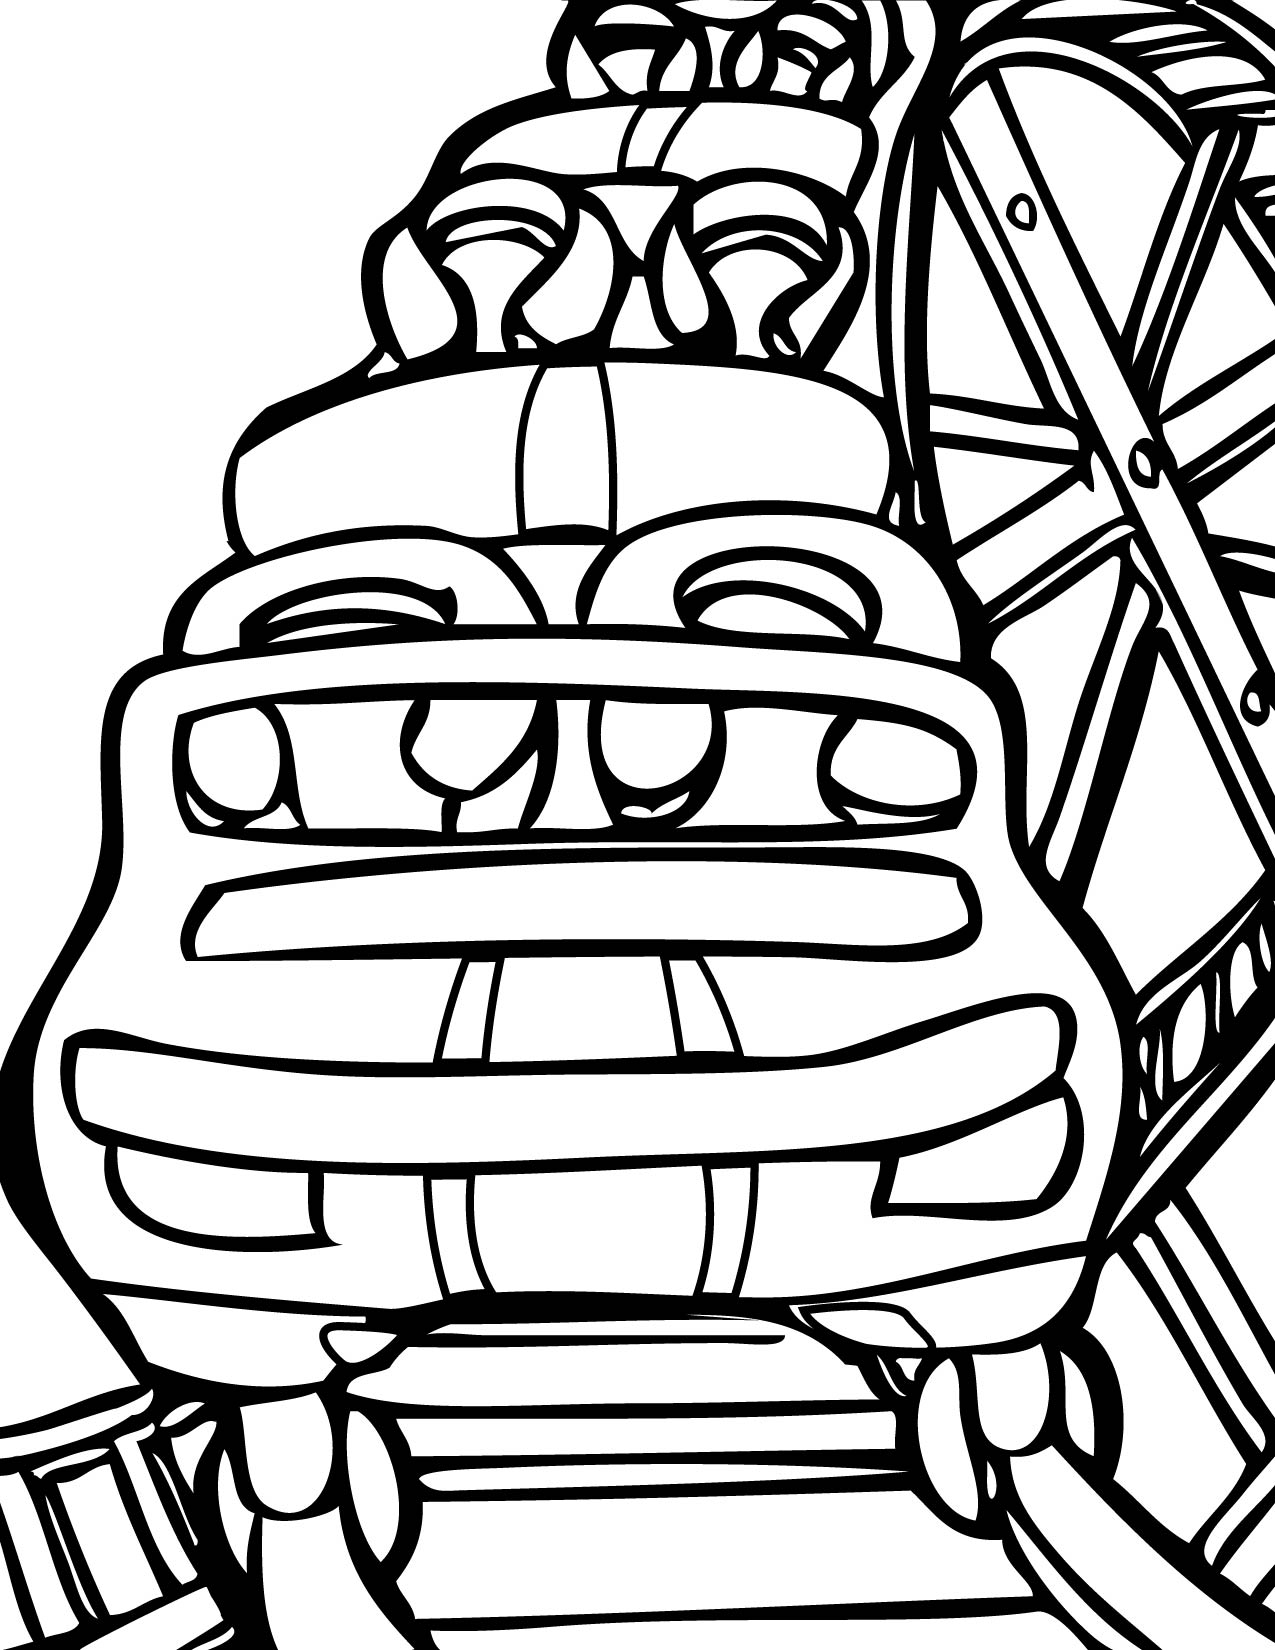 Roller Coaster Coloring Pages at GetColorings.com | Free printable